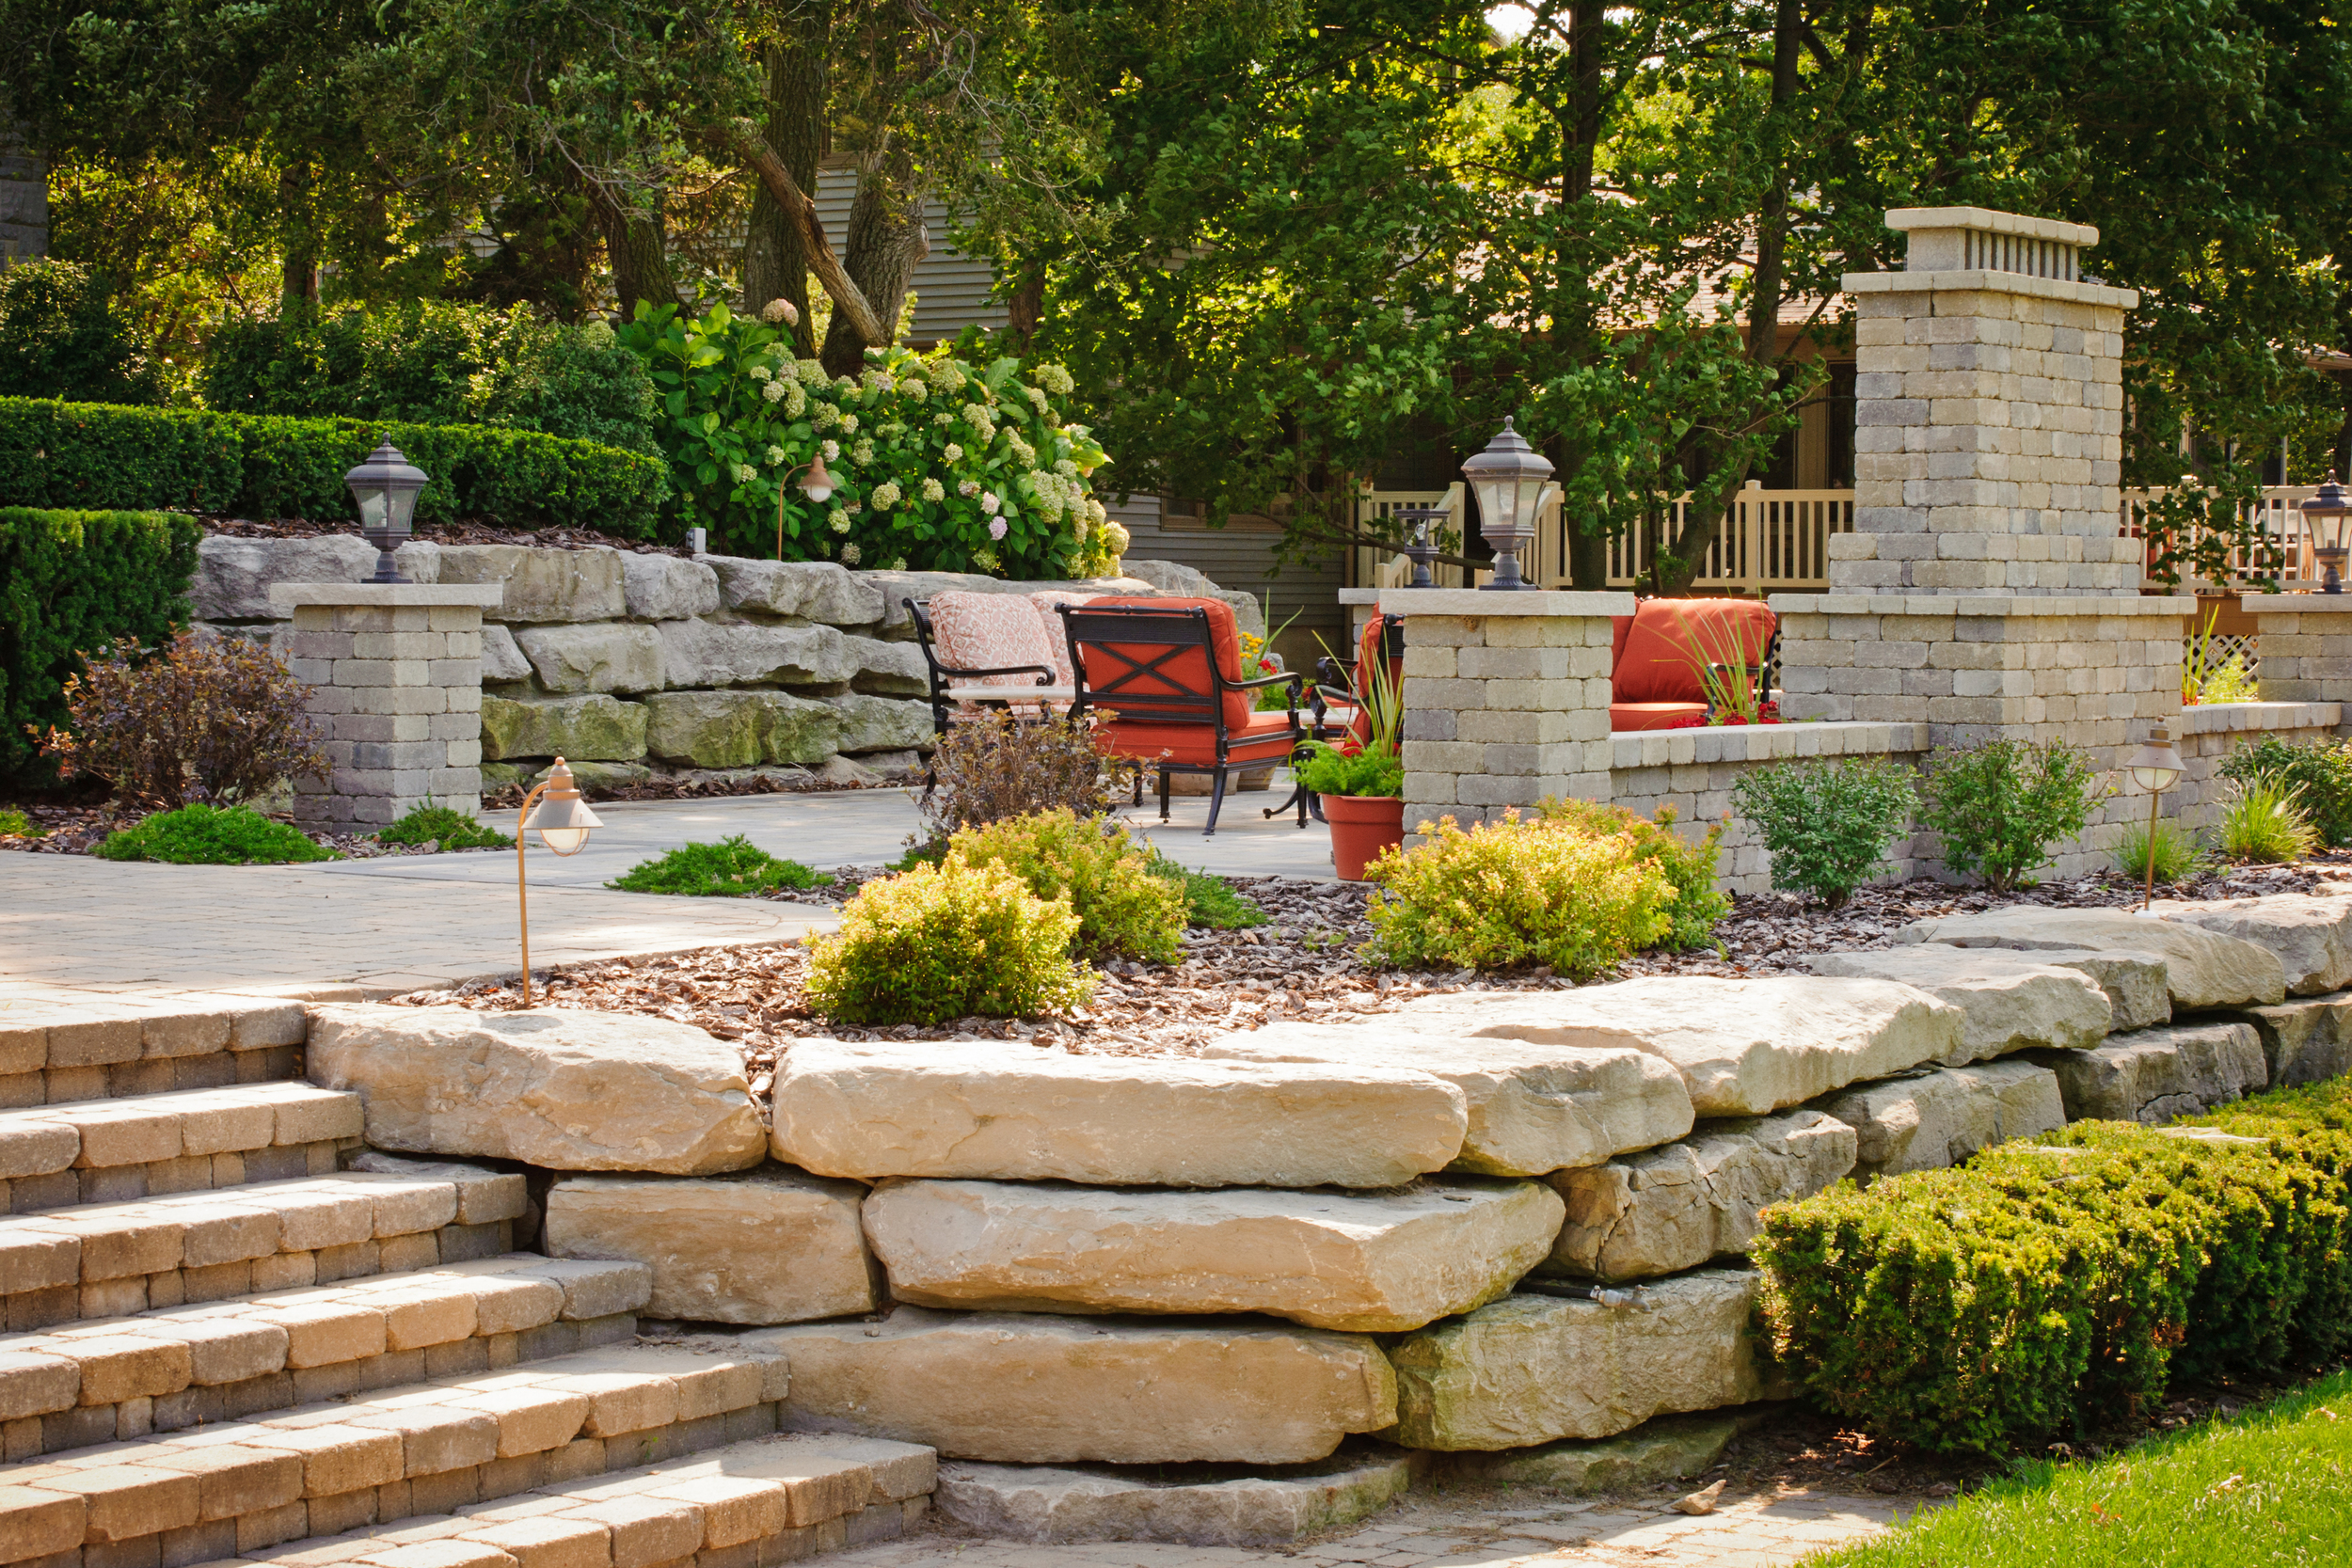  Retaining Wall with Brick Paver Stairs and Outdoor Living Area 